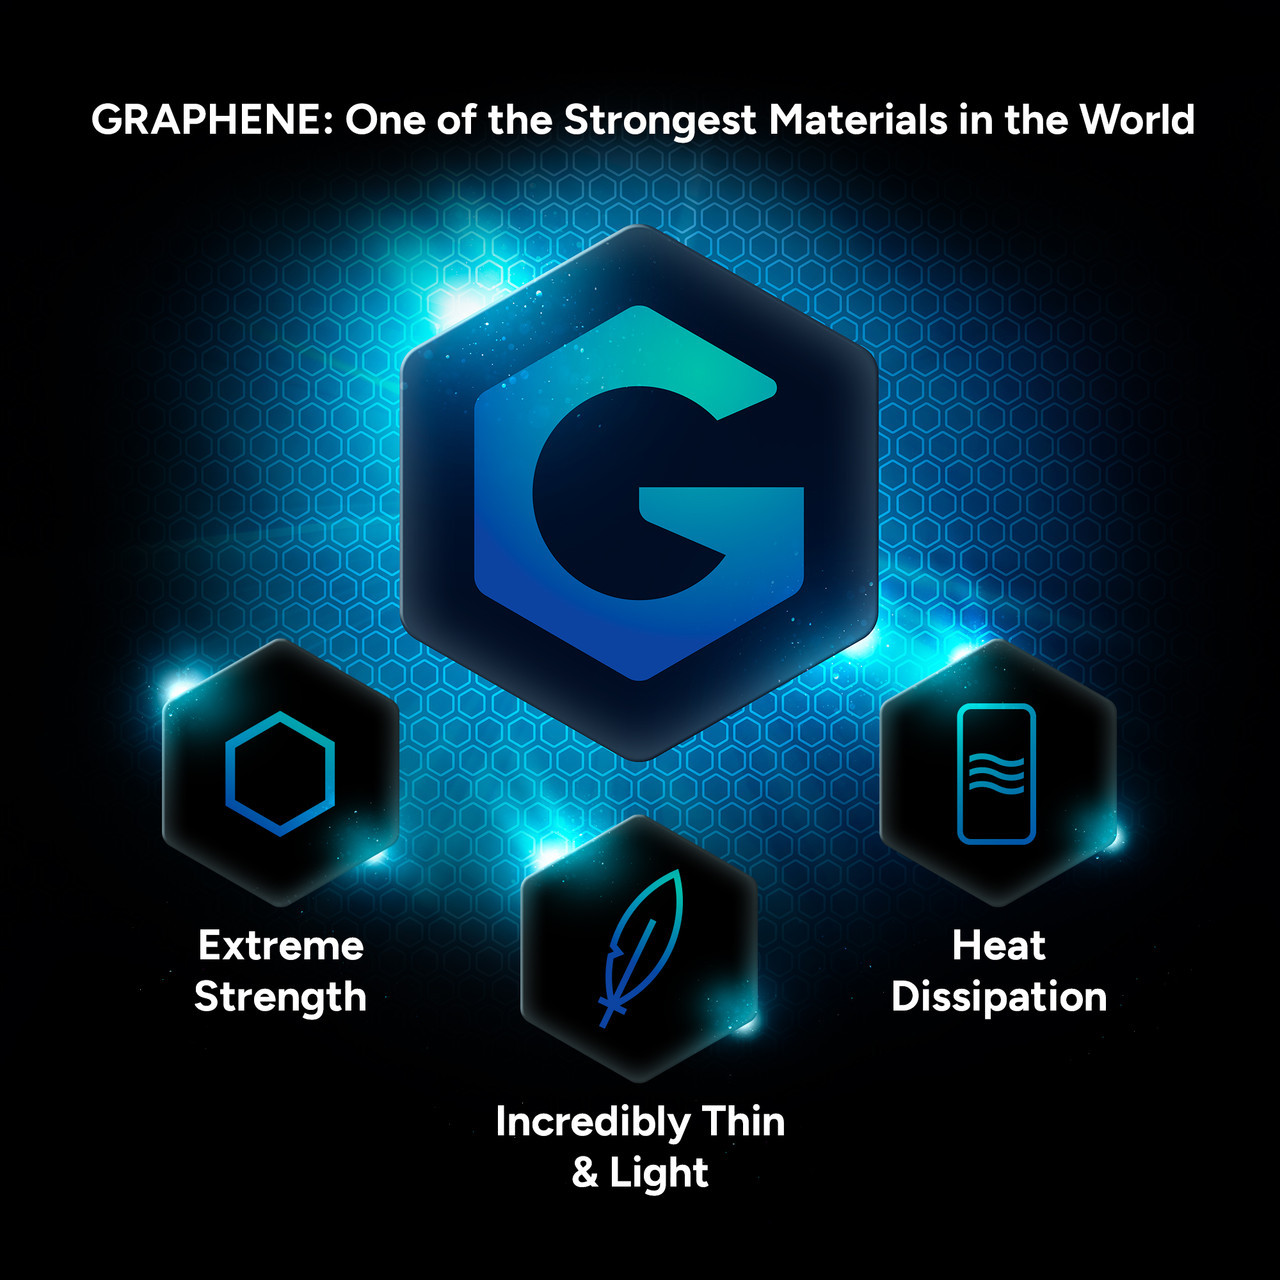 Strengthened with Graphene
|| Denali has been infused with Graphene, the strongest material on earth.